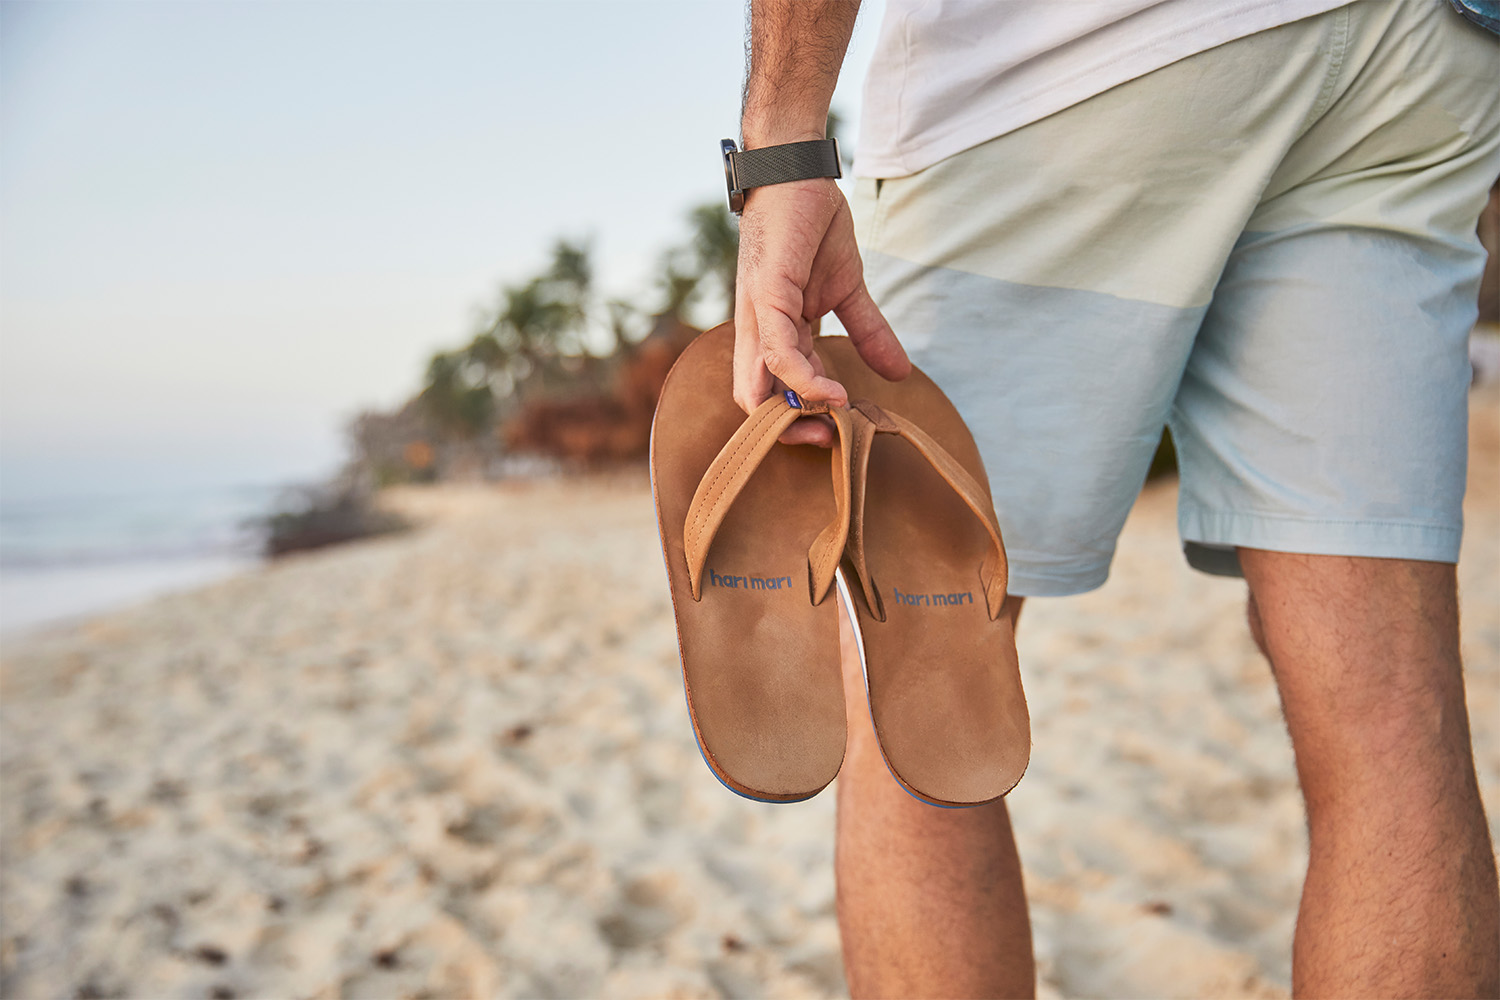 A man carrying a pair of Hari Mari sandals on the beach. We caught up with co-founder Lila Stewart to talk about the company's 10-year anniversary in 2022.